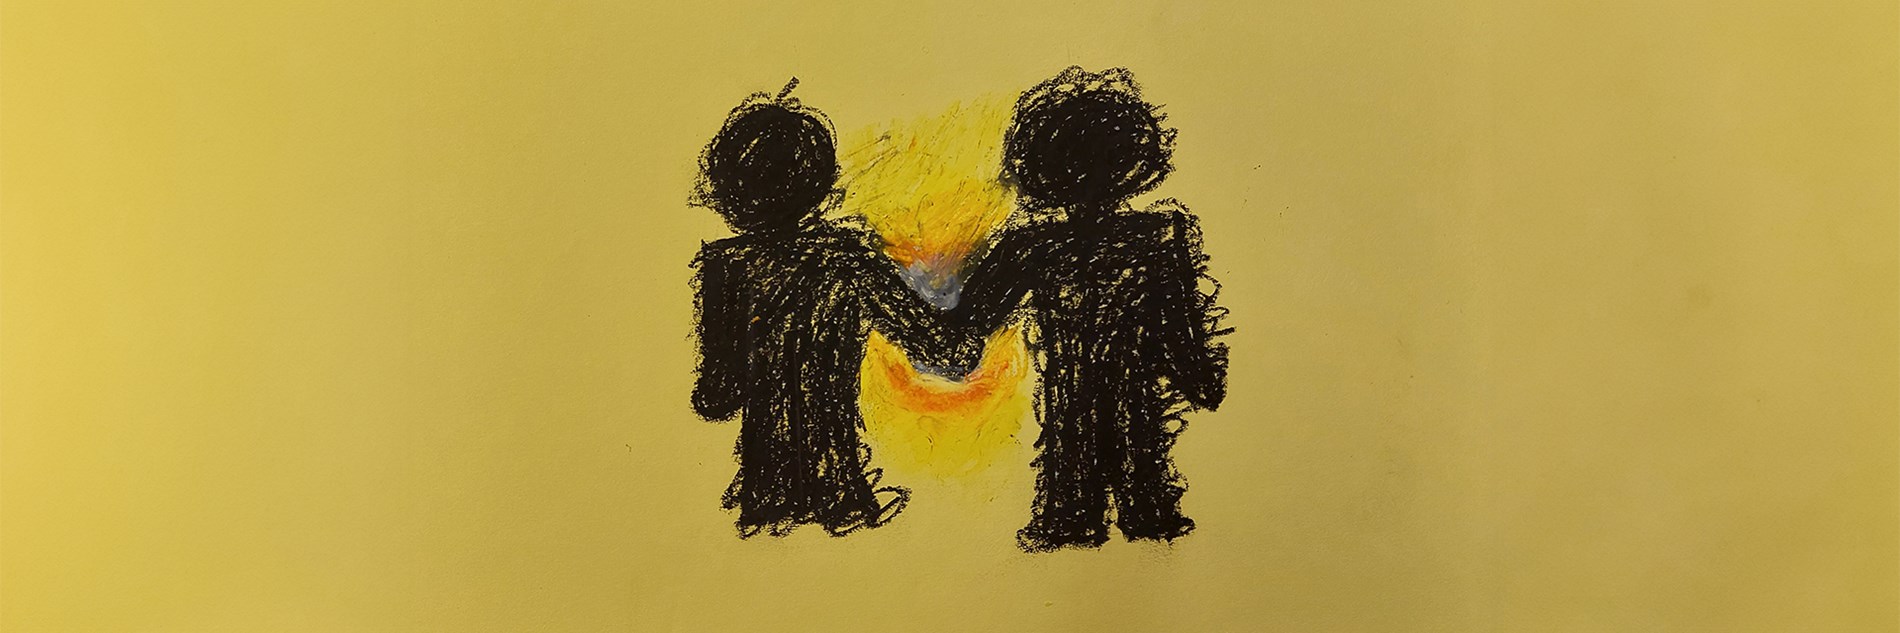 A crayon drawing on a yellow background of two figures in black silhouette holding hands. There joined hands are surrounded by yellow and orange.